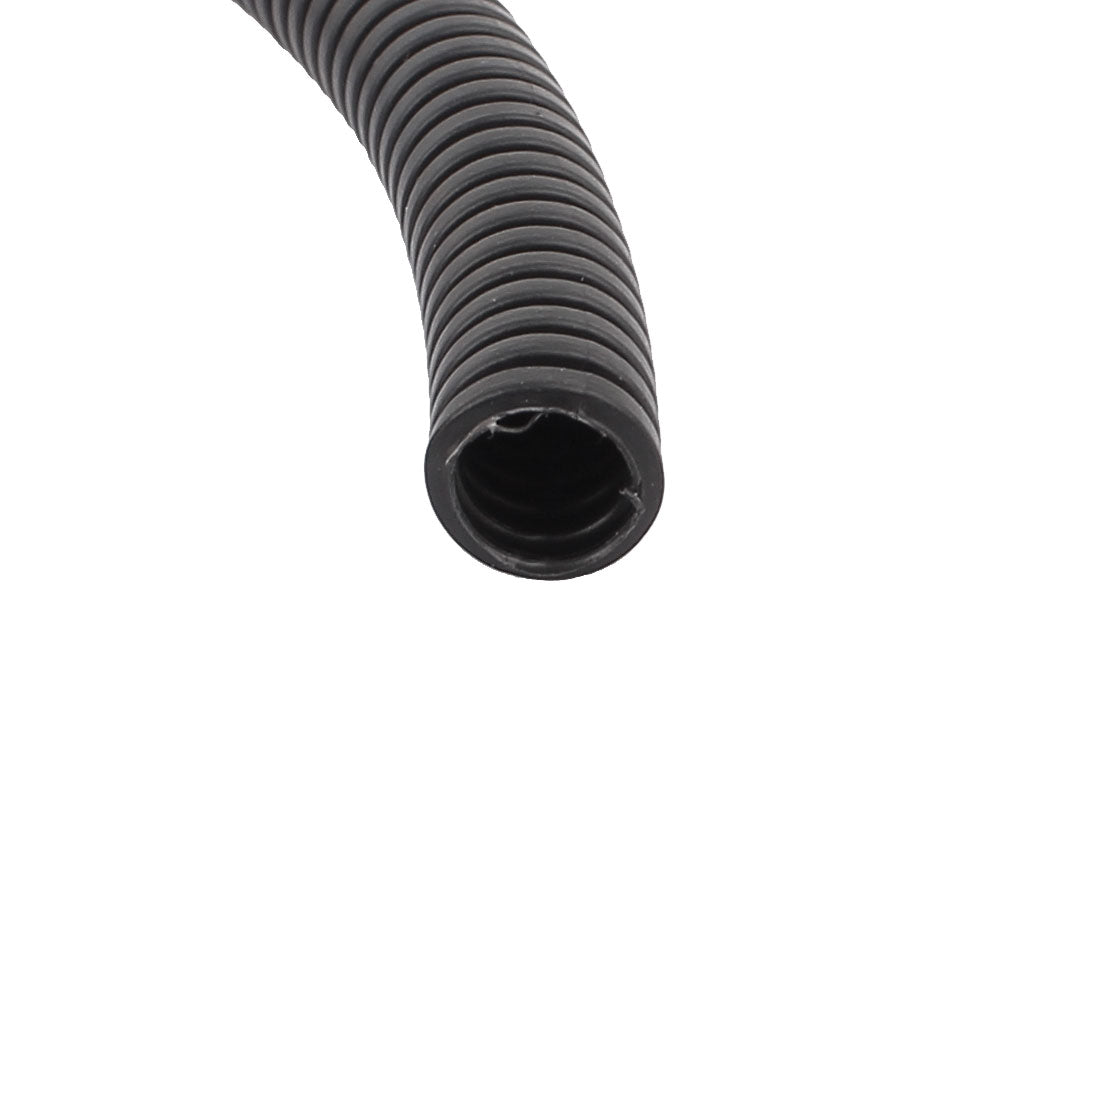 uxcell Uxcell 3.6 M 7 x 10 mm Plastic Flexible Corrugated Conduit Tube for Garden,Office Black